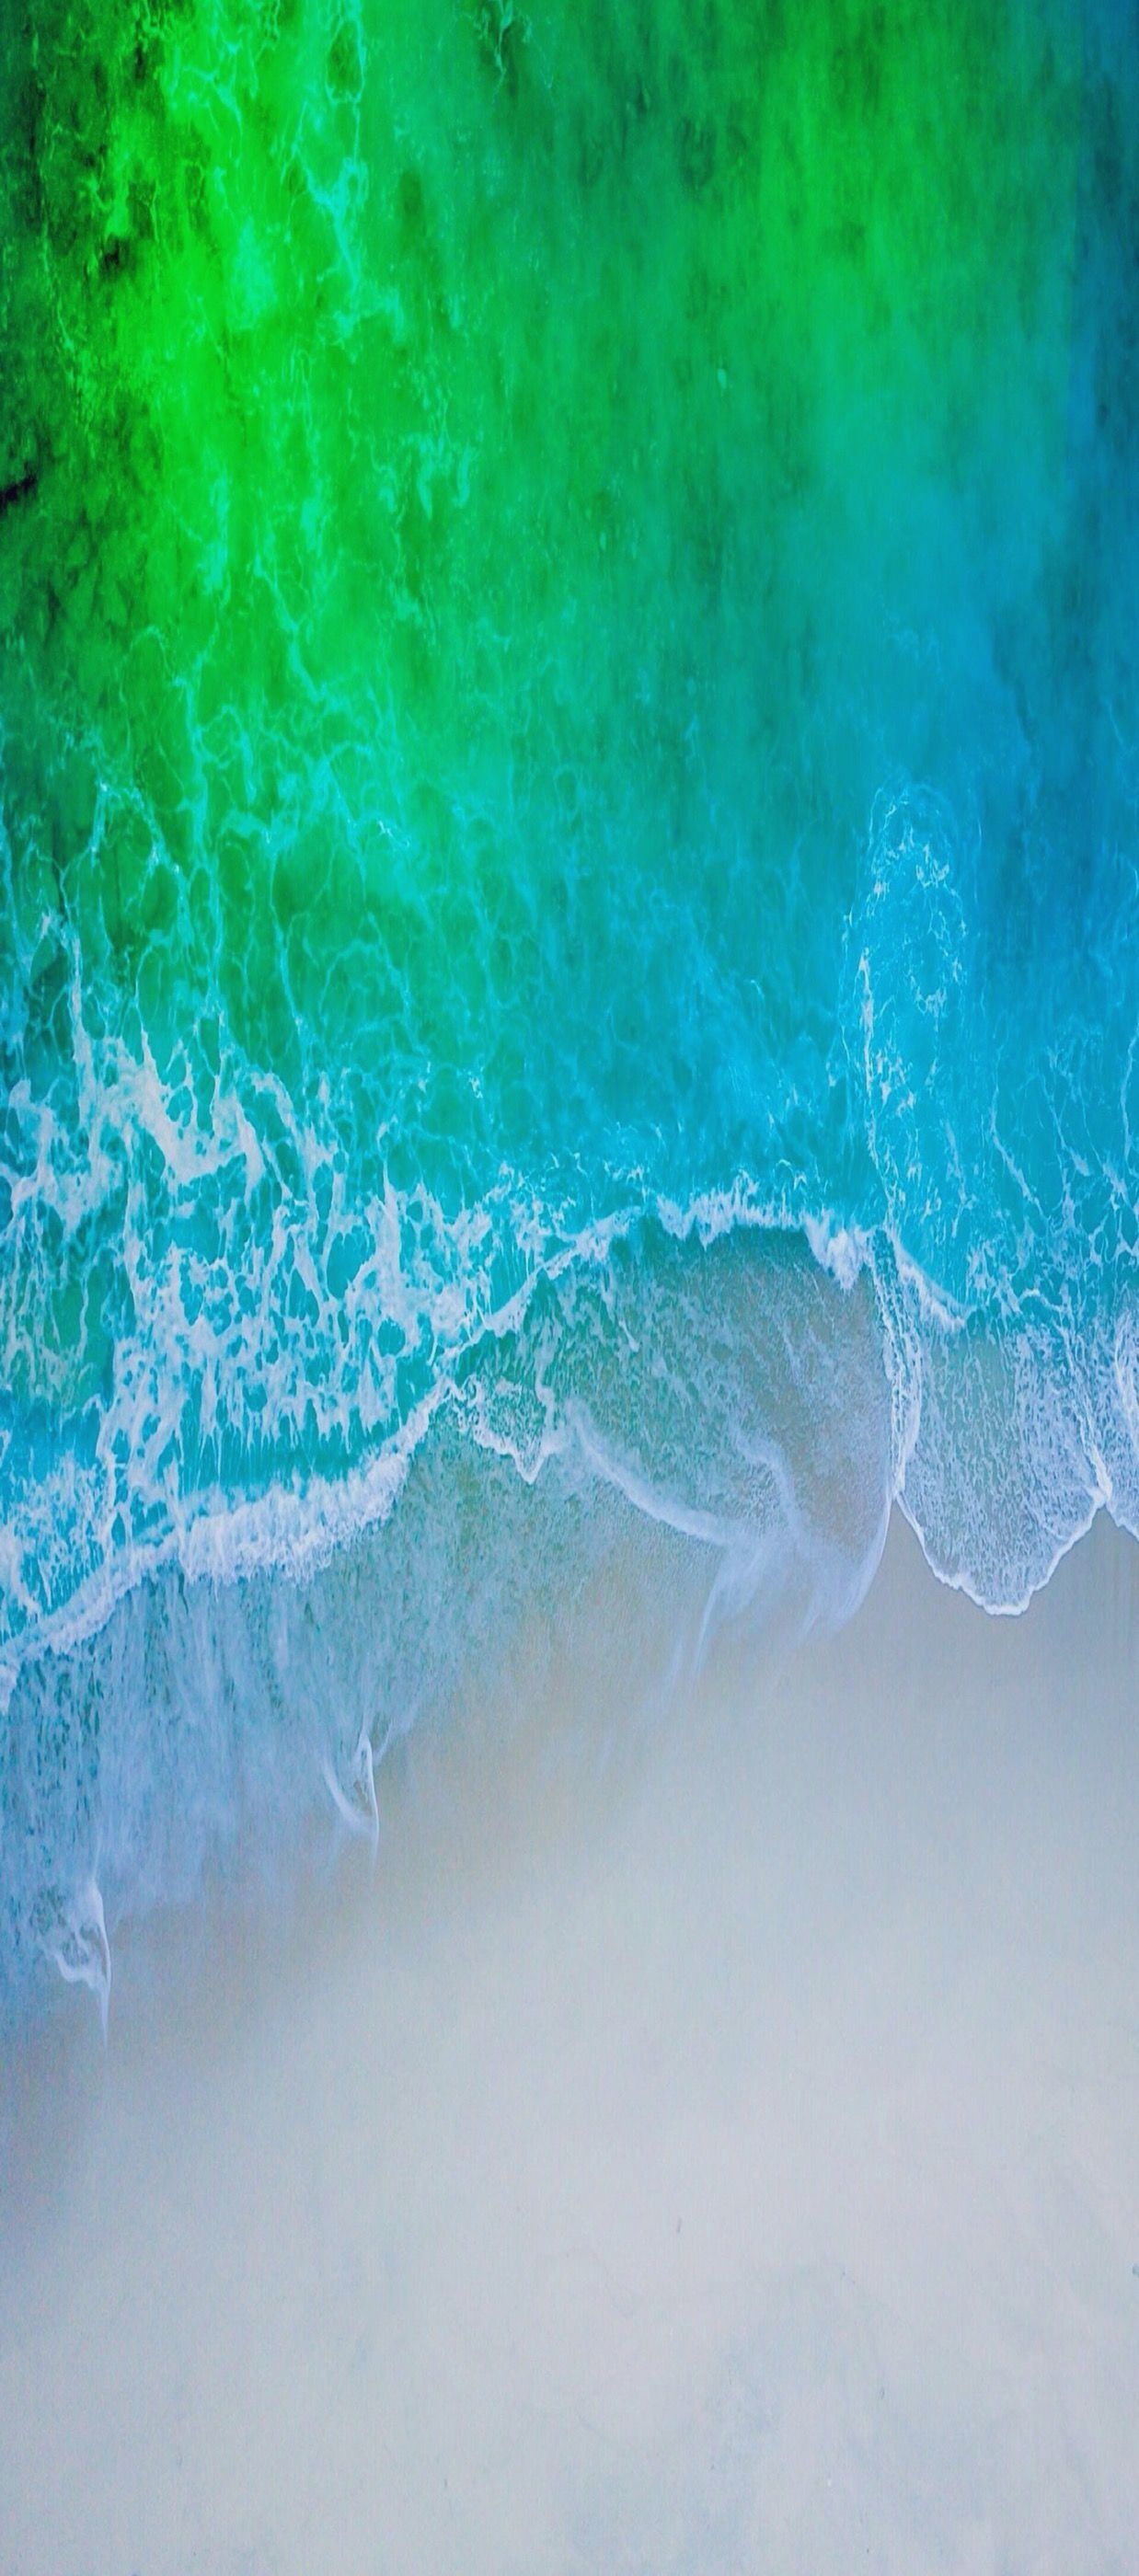 15 Best beach wallpapers for iPhone in 2023 Free download  iGeeksBlog